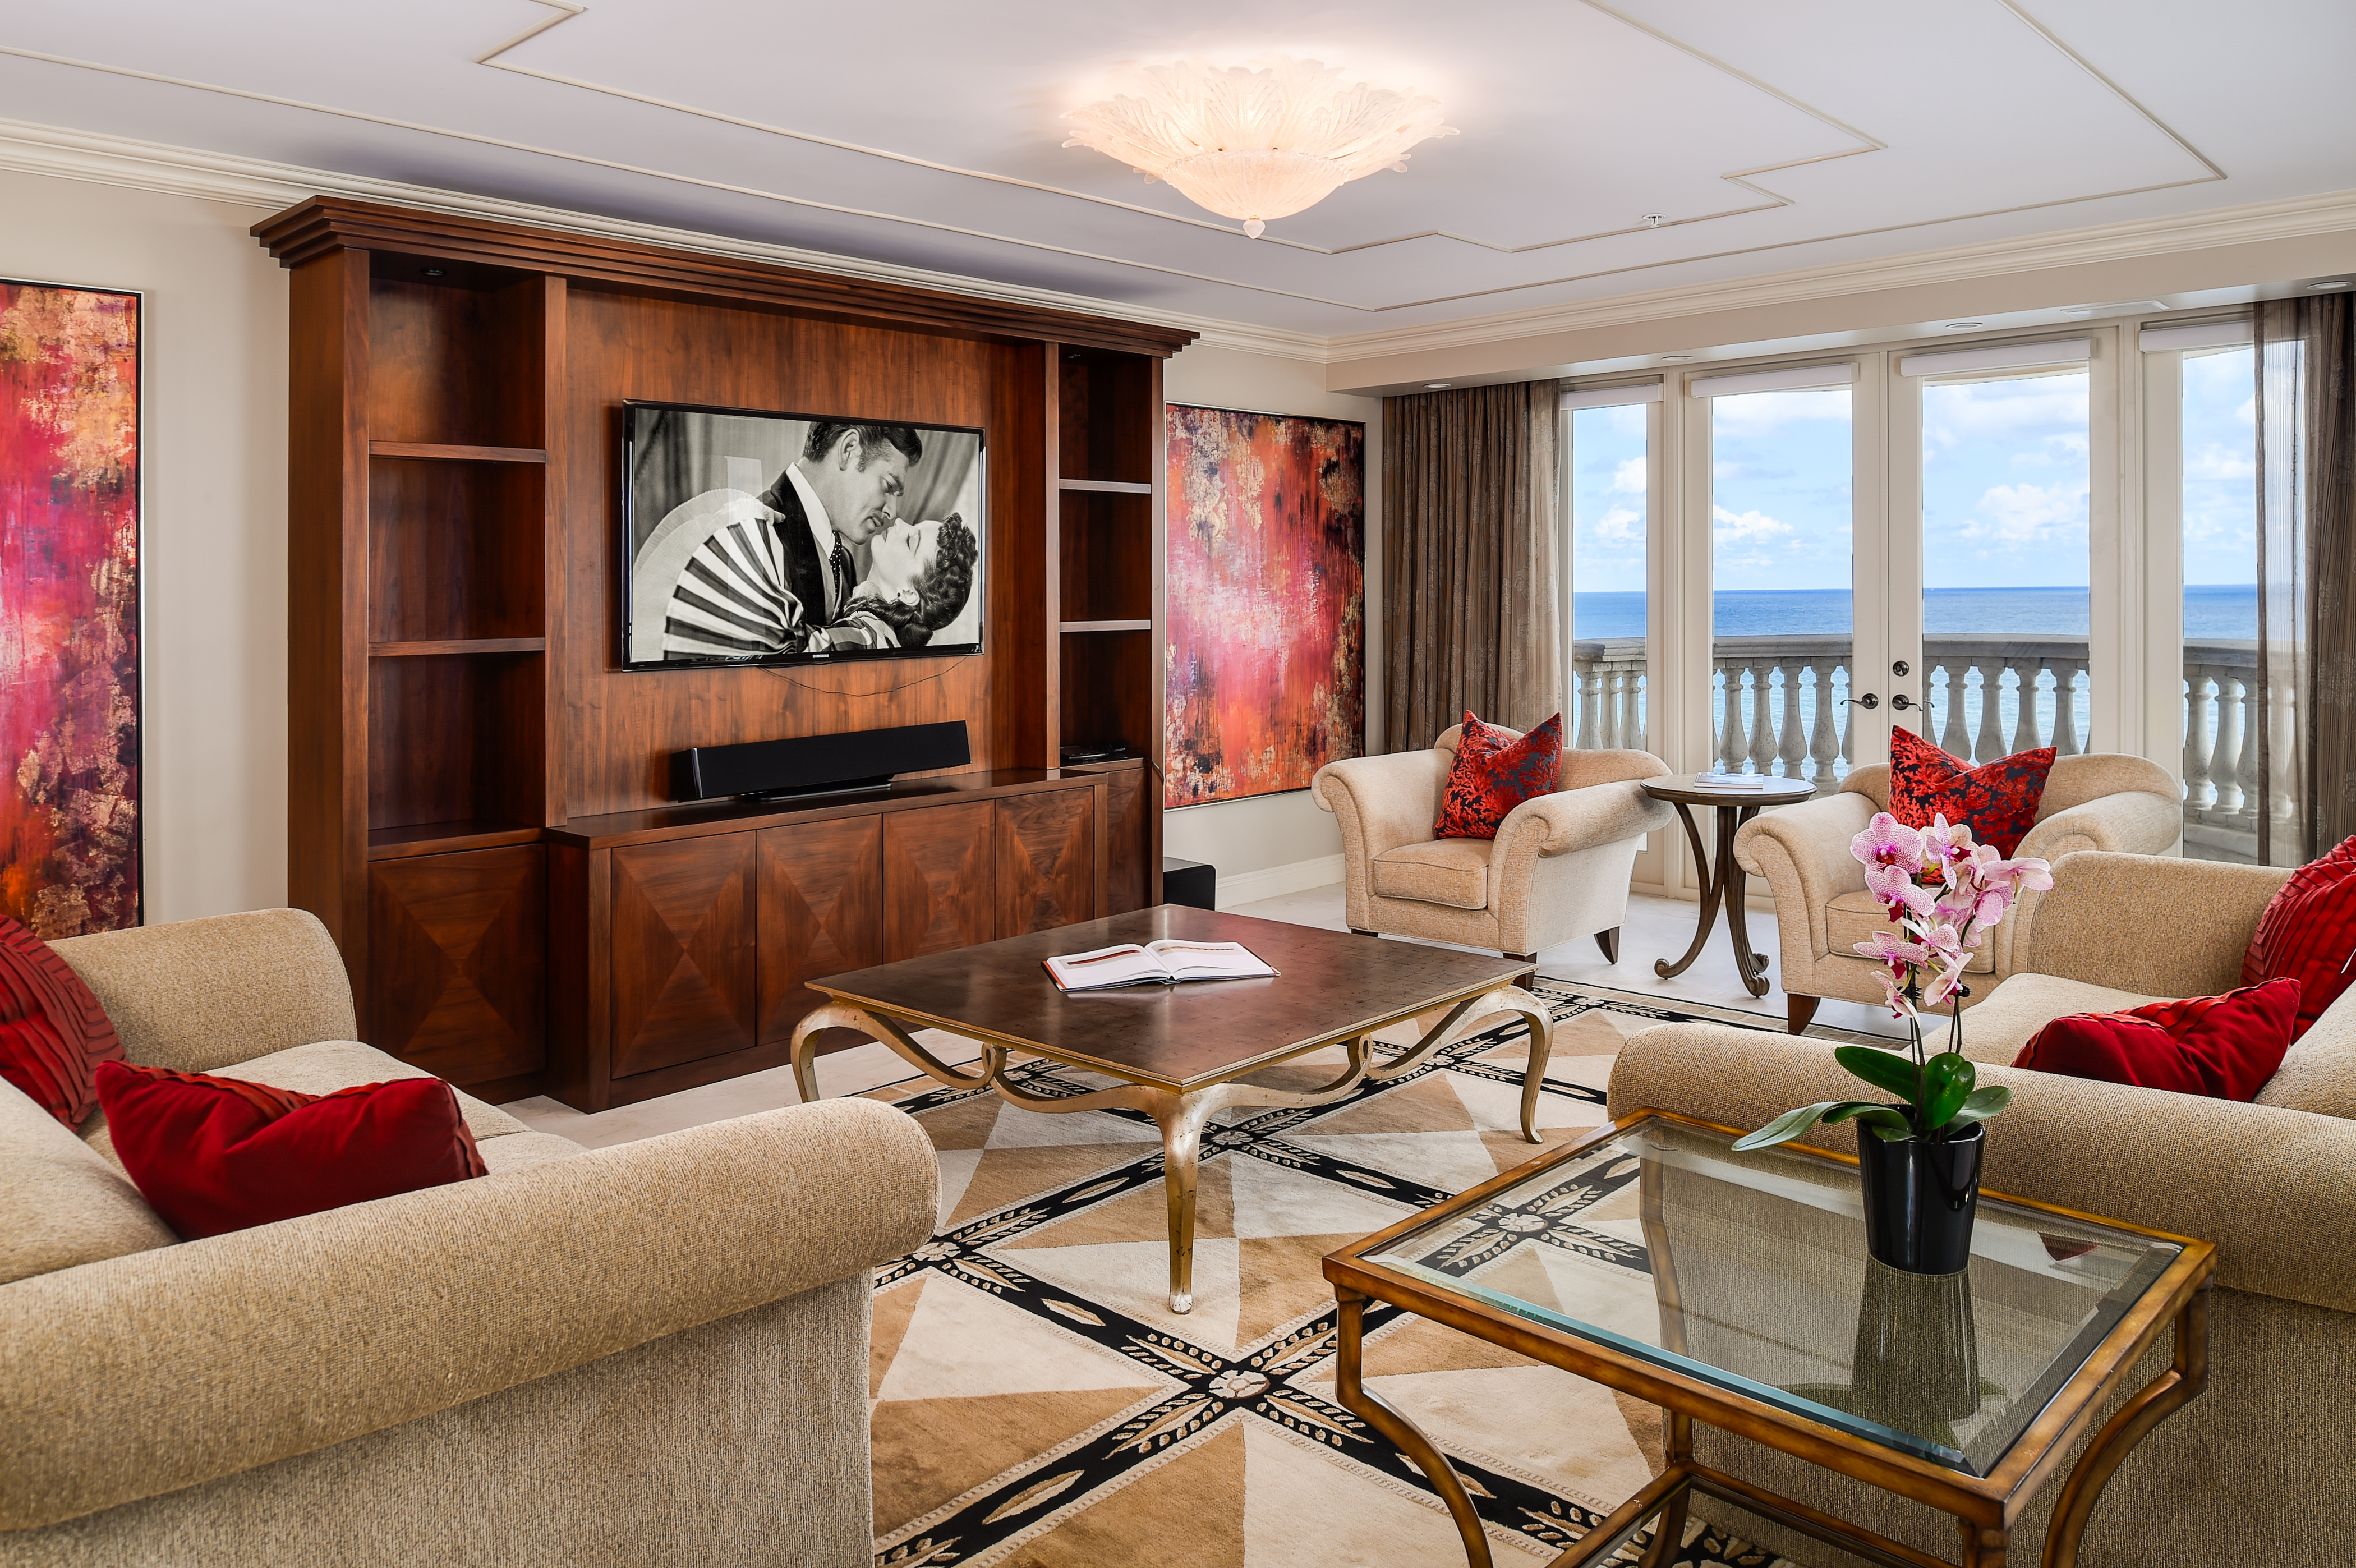 Interior of a luxurious living room with ocean views and Gone With the Wind playing on the TV.